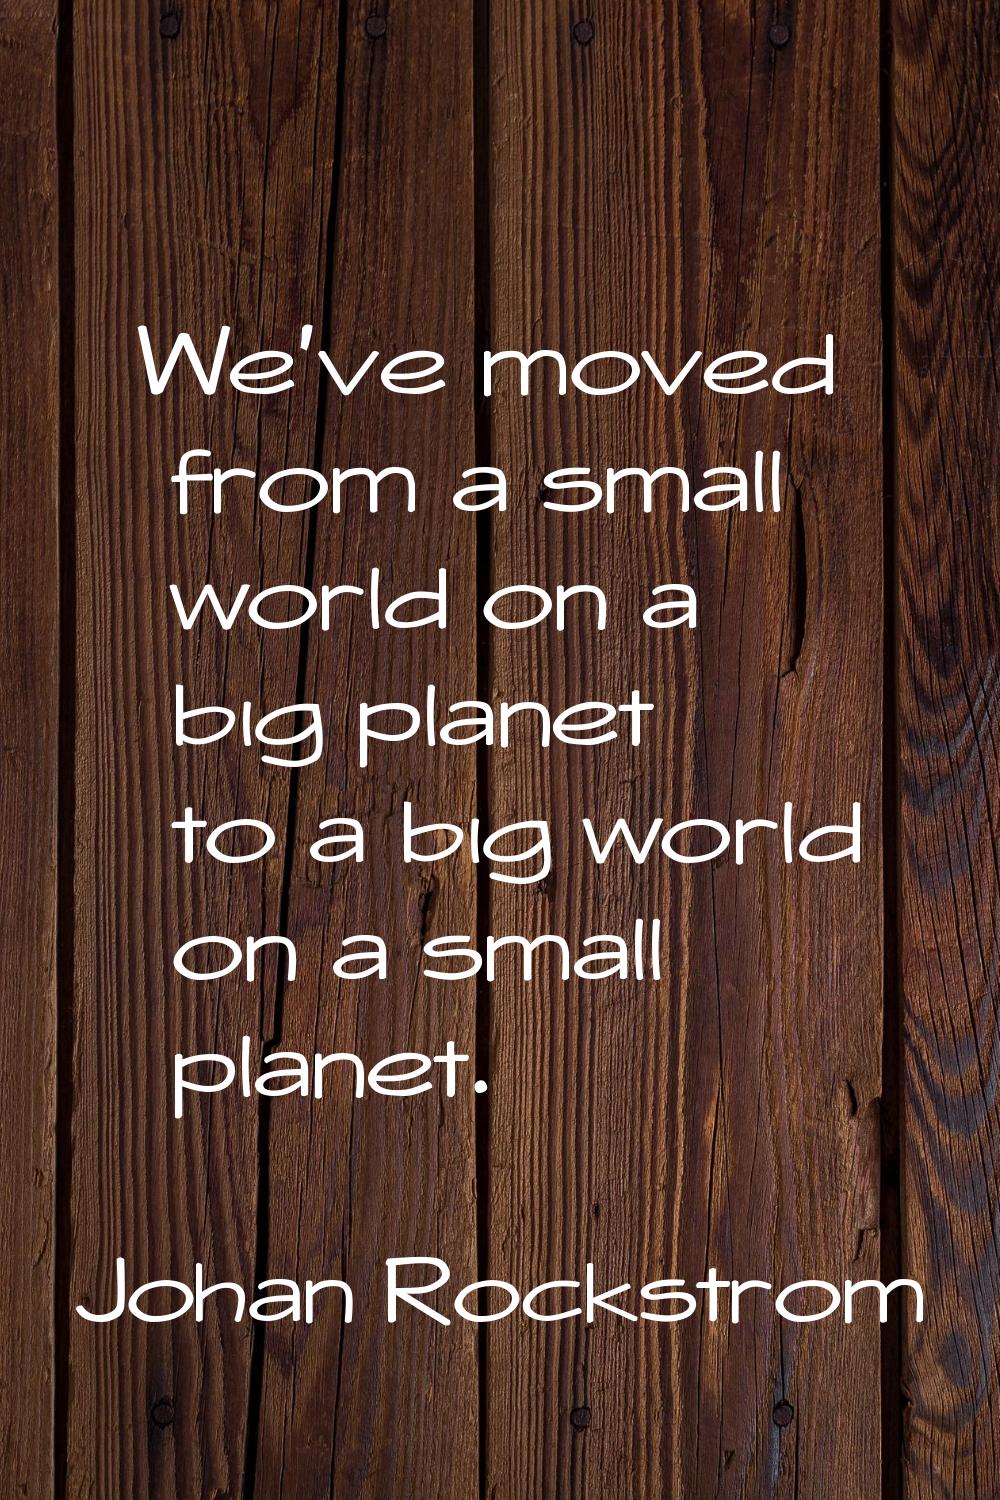 We've moved from a small world on a big planet to a big world on a small planet.